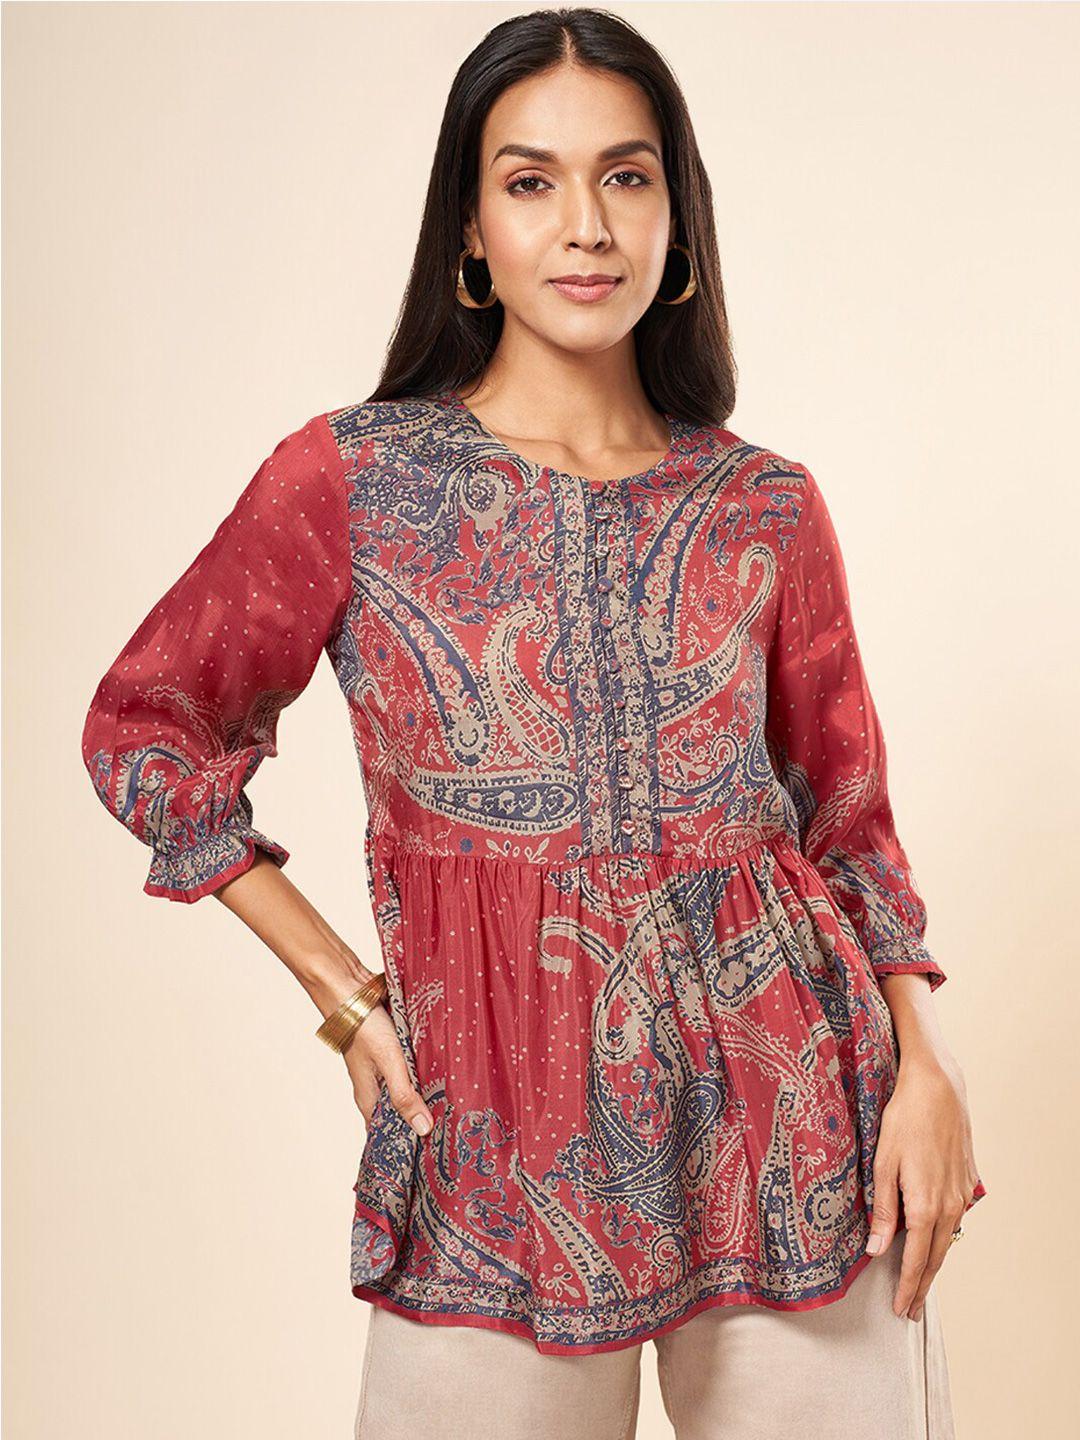 marigold-lane-paisley-ethnic-motifs-printed-cuffed-sleeves-a-line-top